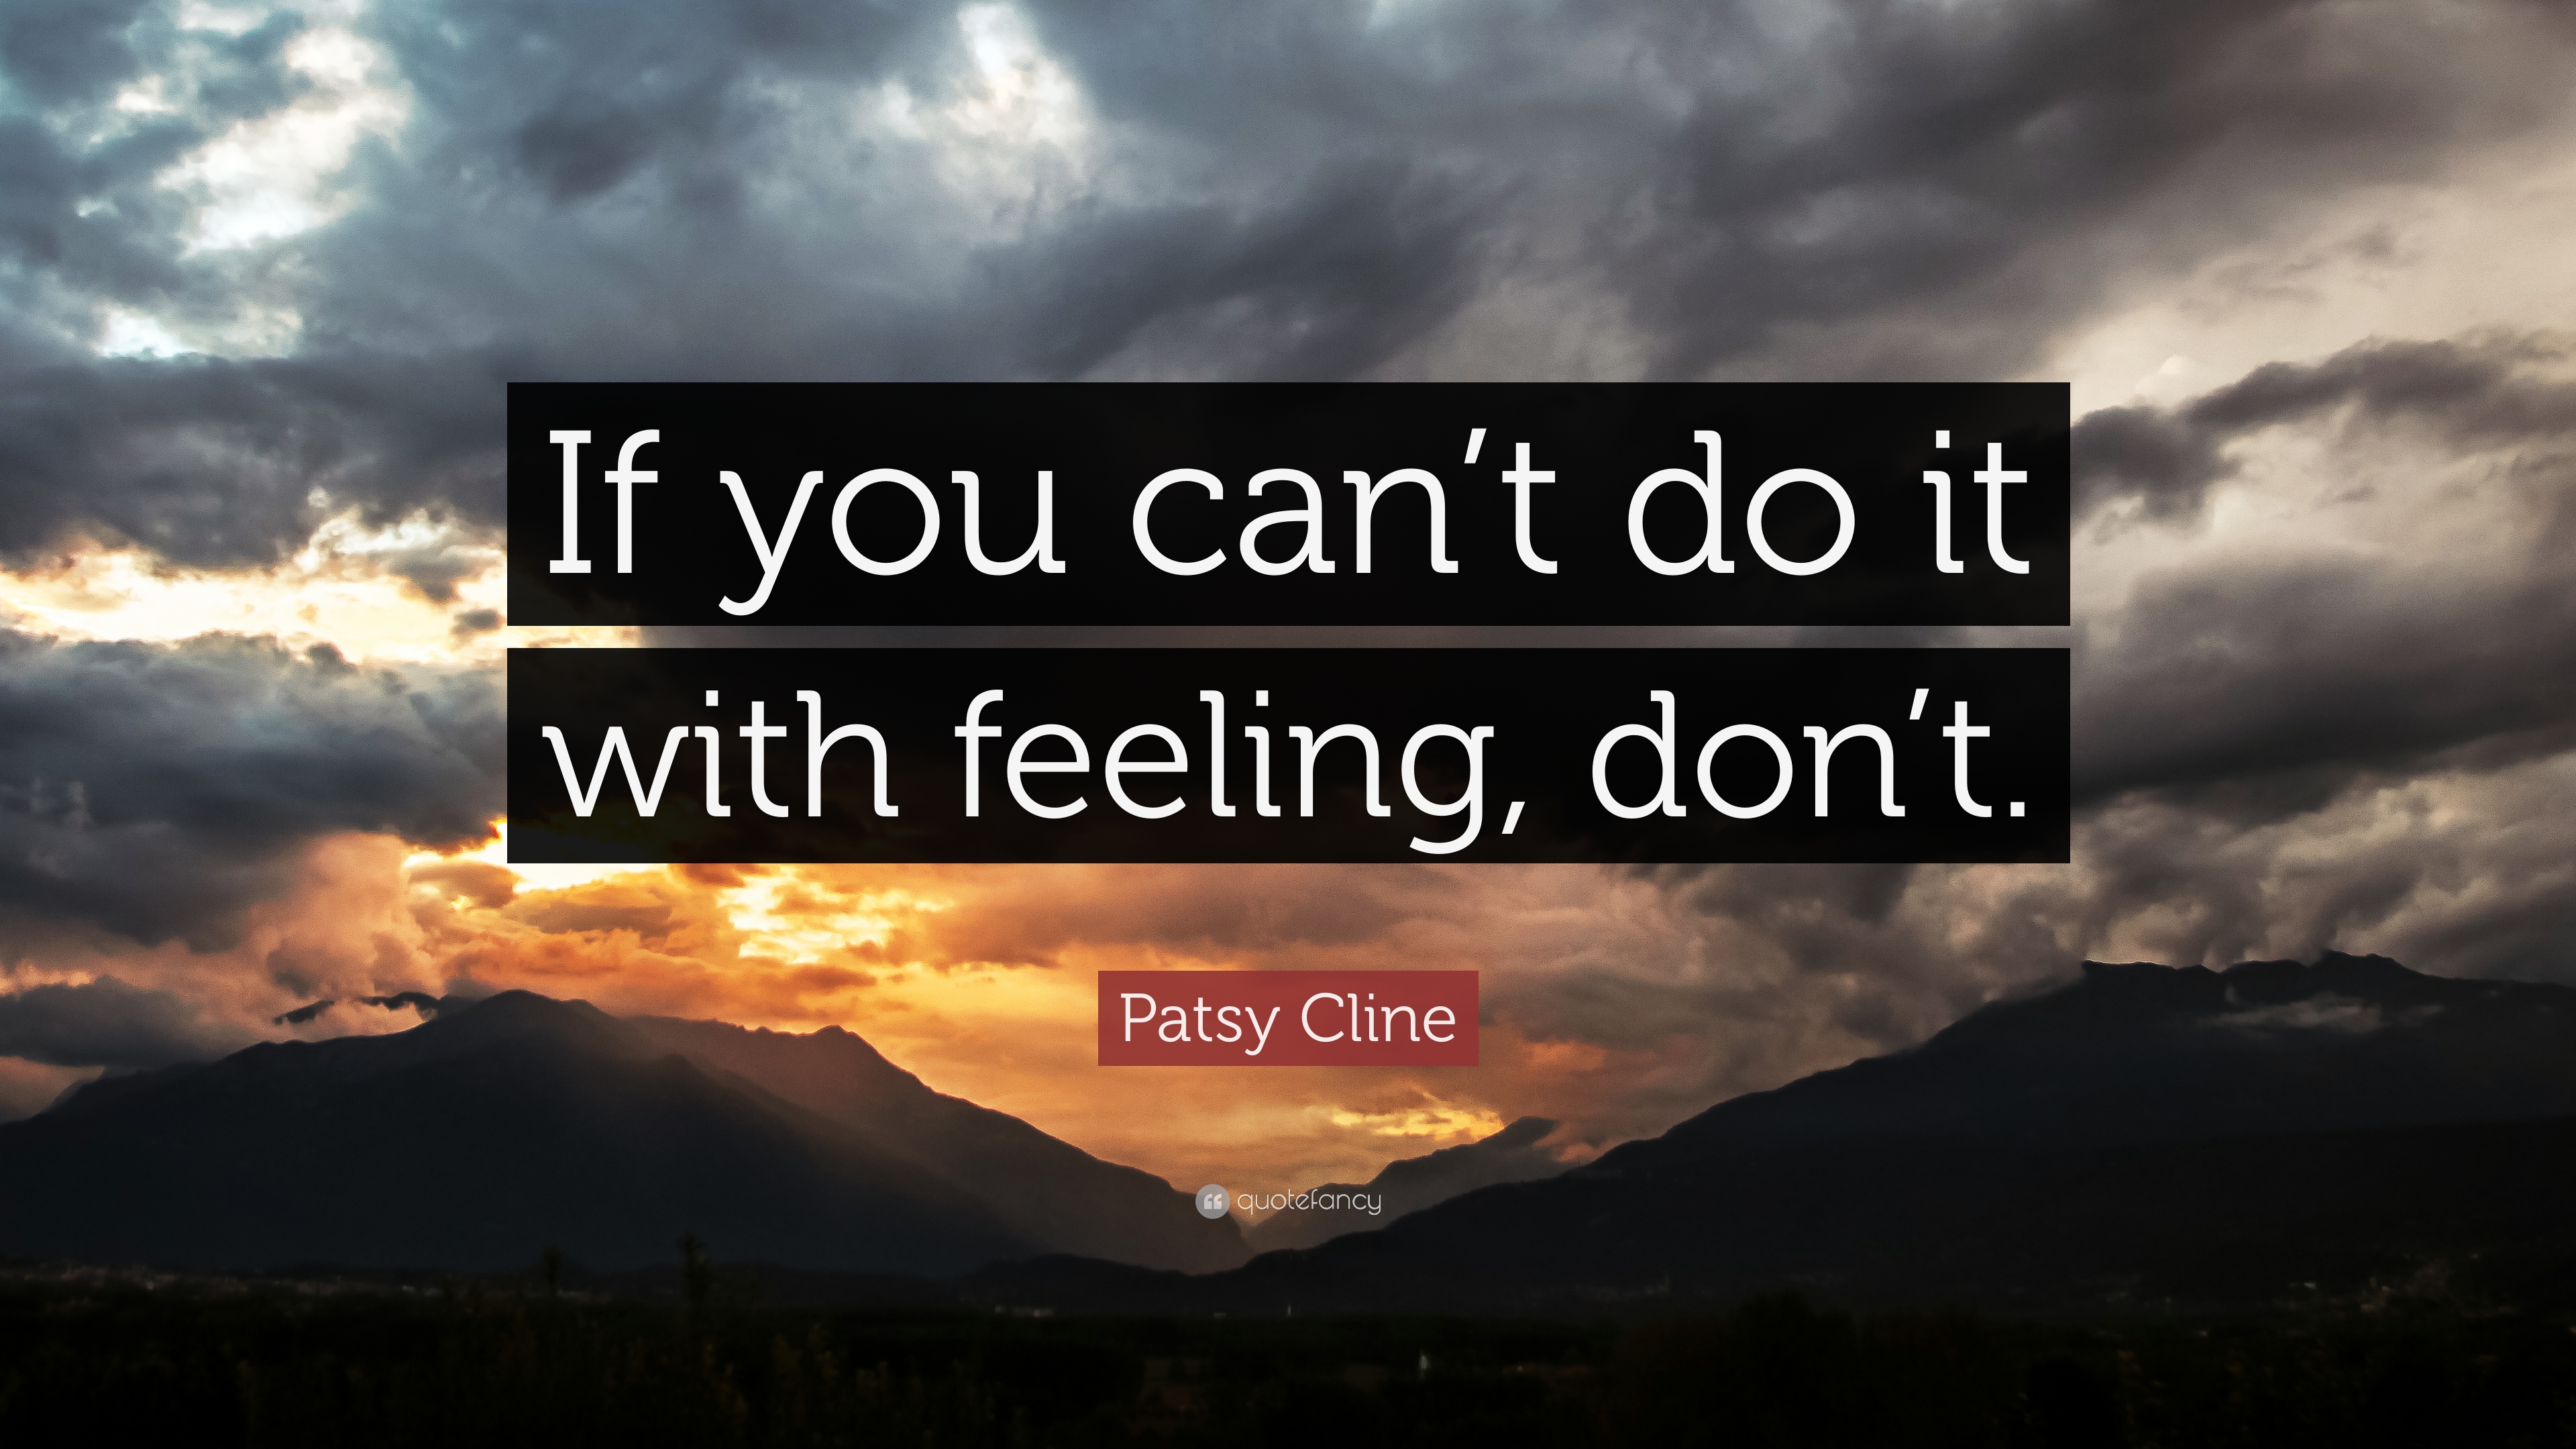 Patsy Cline Quotes (38 wallpaper)